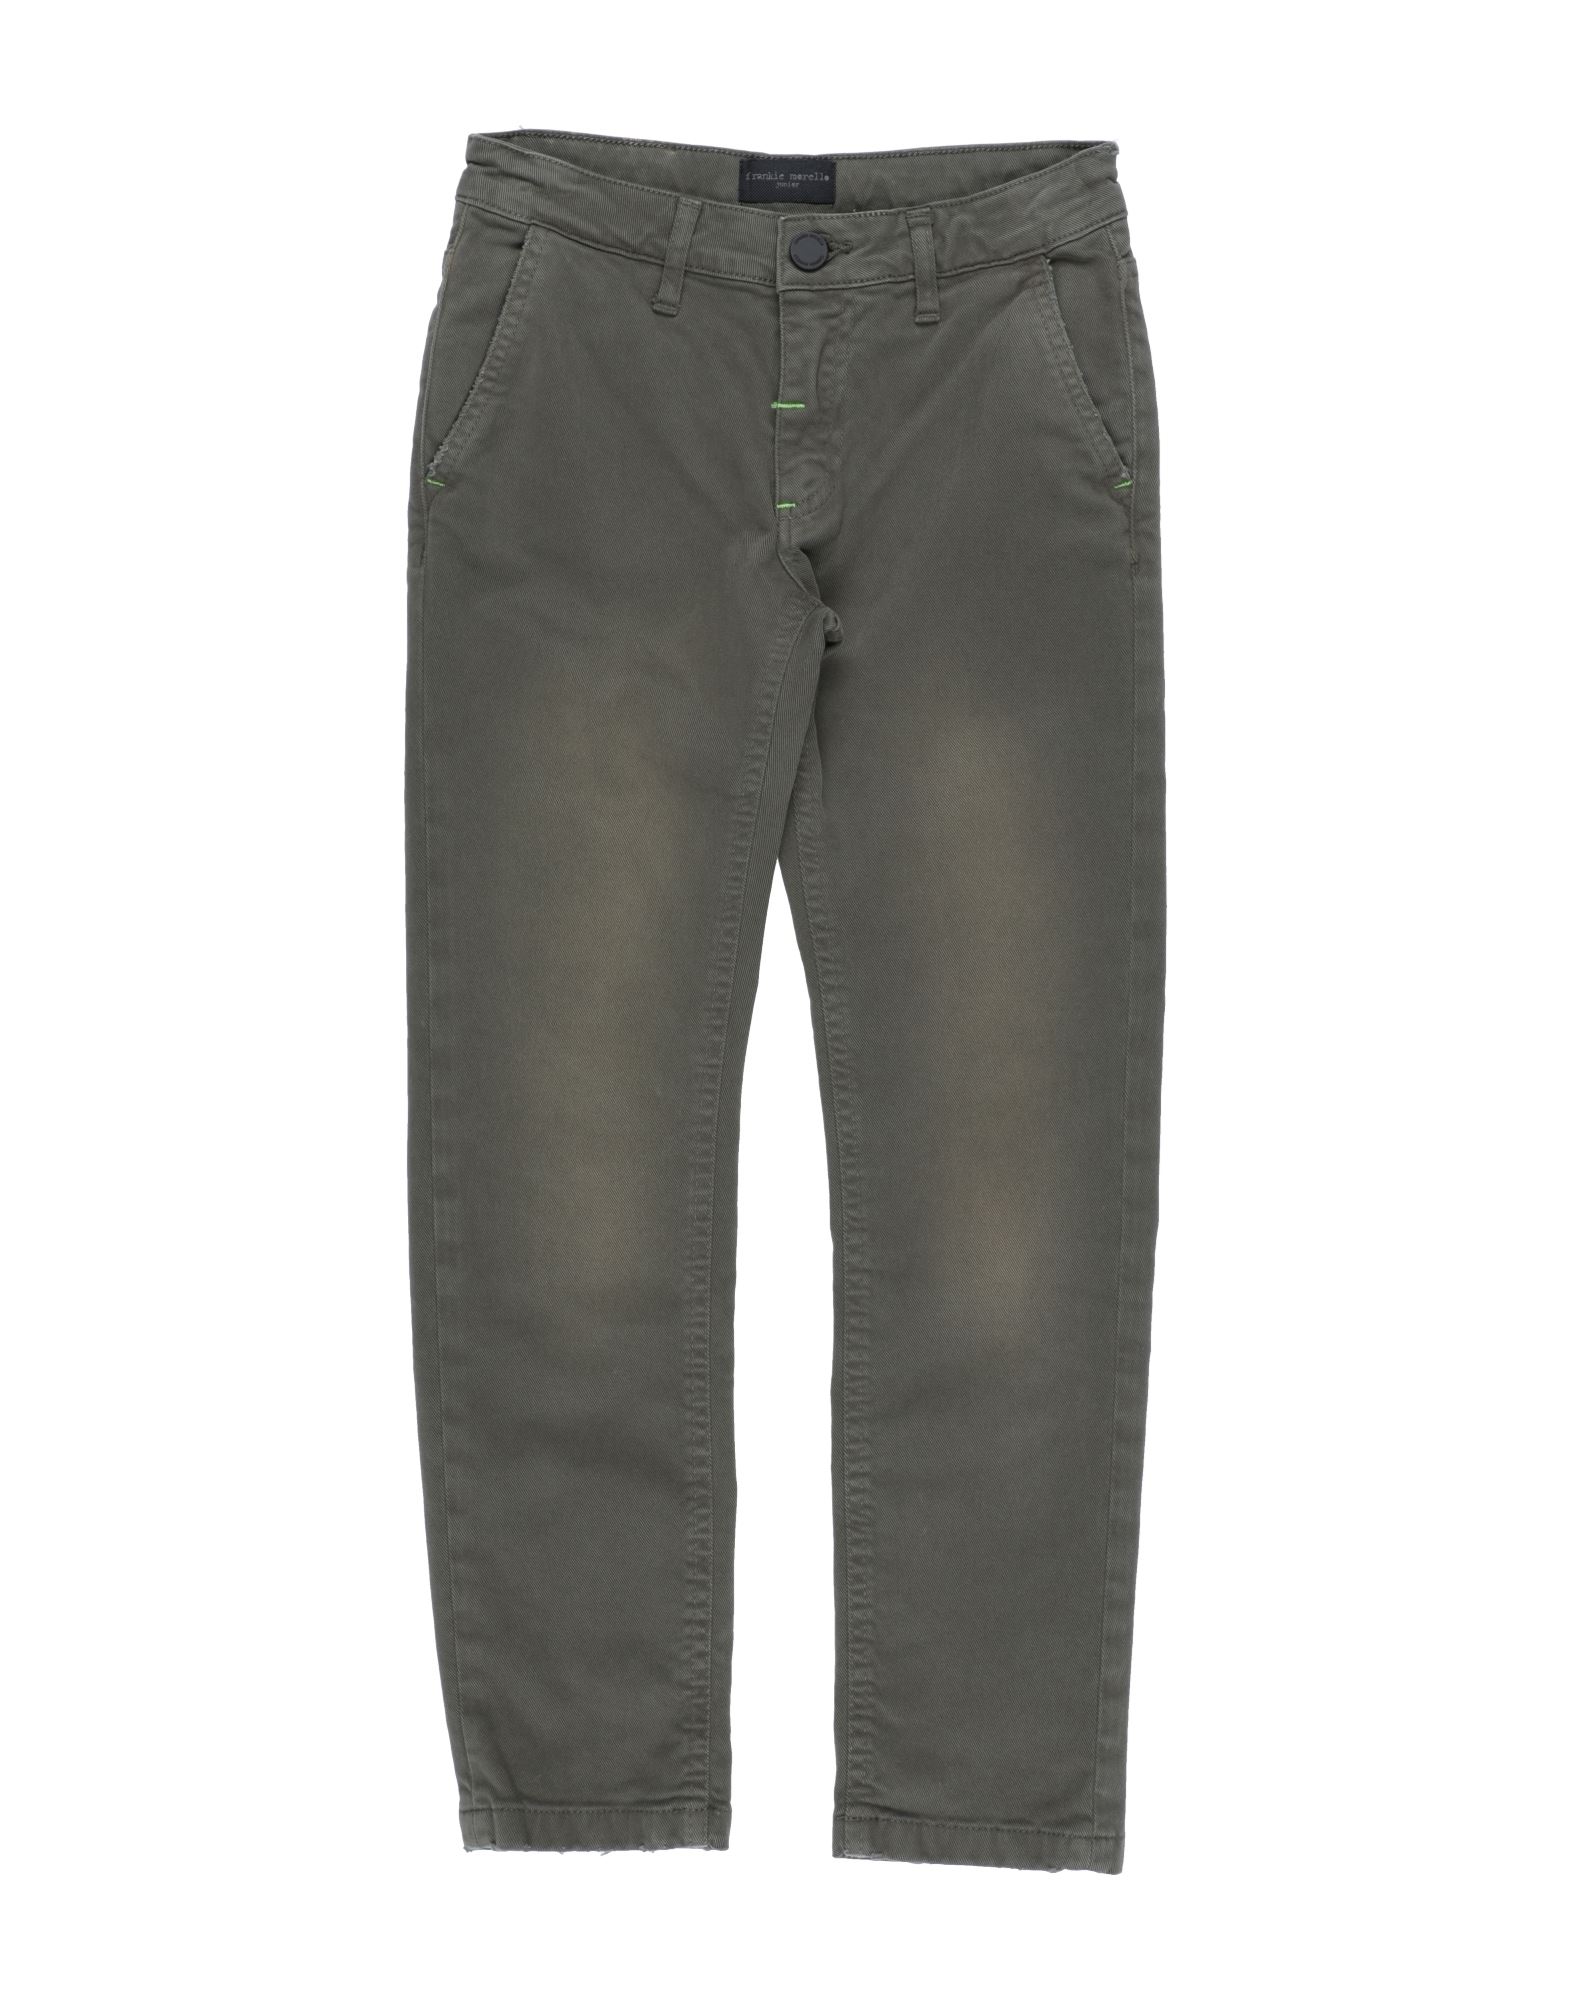 Frankie Morello Kids' Pants In Military Green